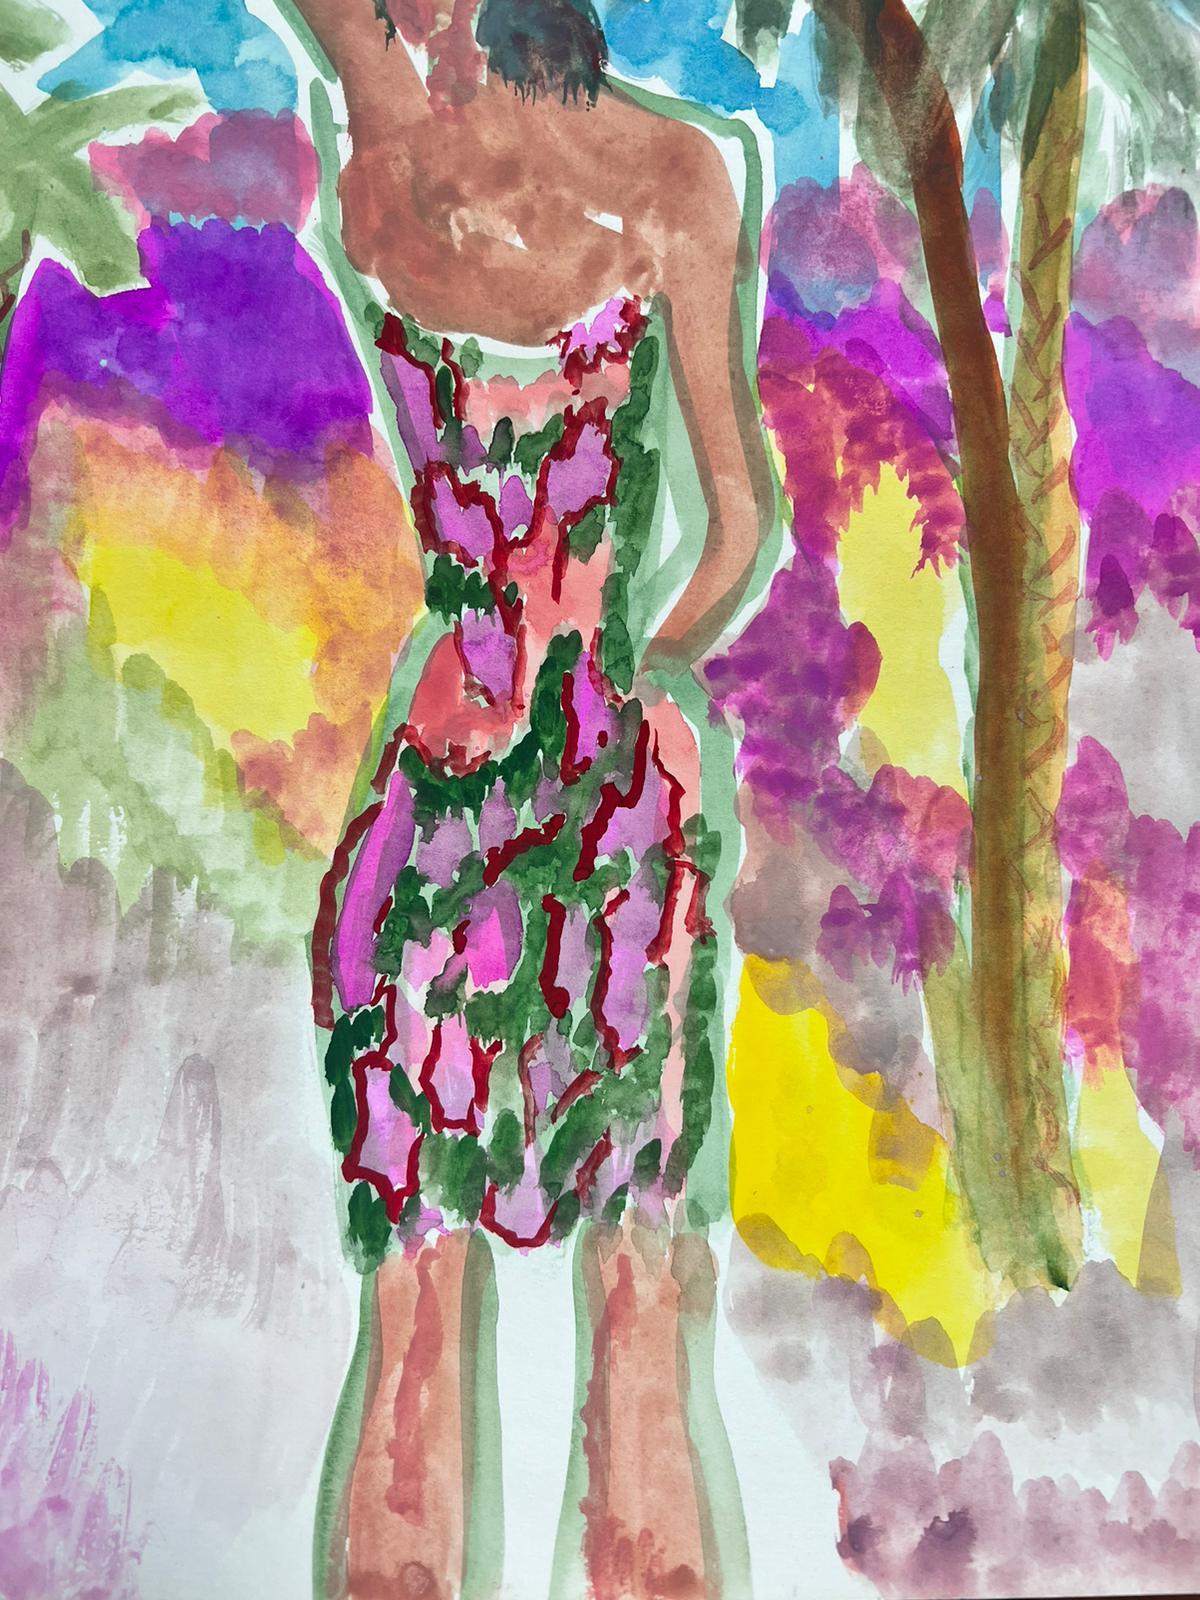 JEAN MARC (1949-2019) 20th CENTURY FRENCH MODERNIST PAINTING Tropical Girl - Modern Art by Jean Marc